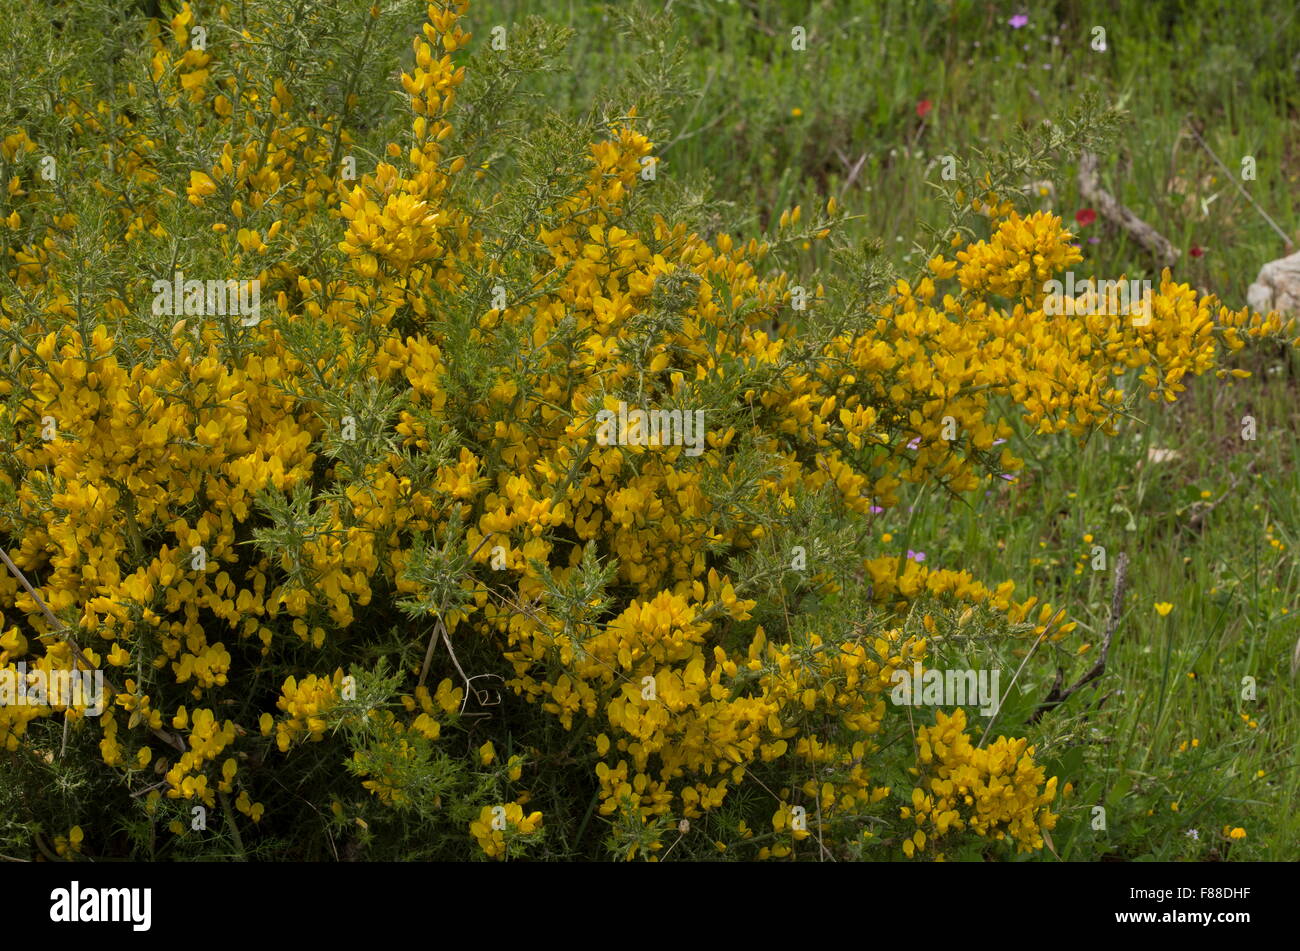 Andalucian gorse, Ulex baeticus, in flower. South-west Spain. Stock Photo